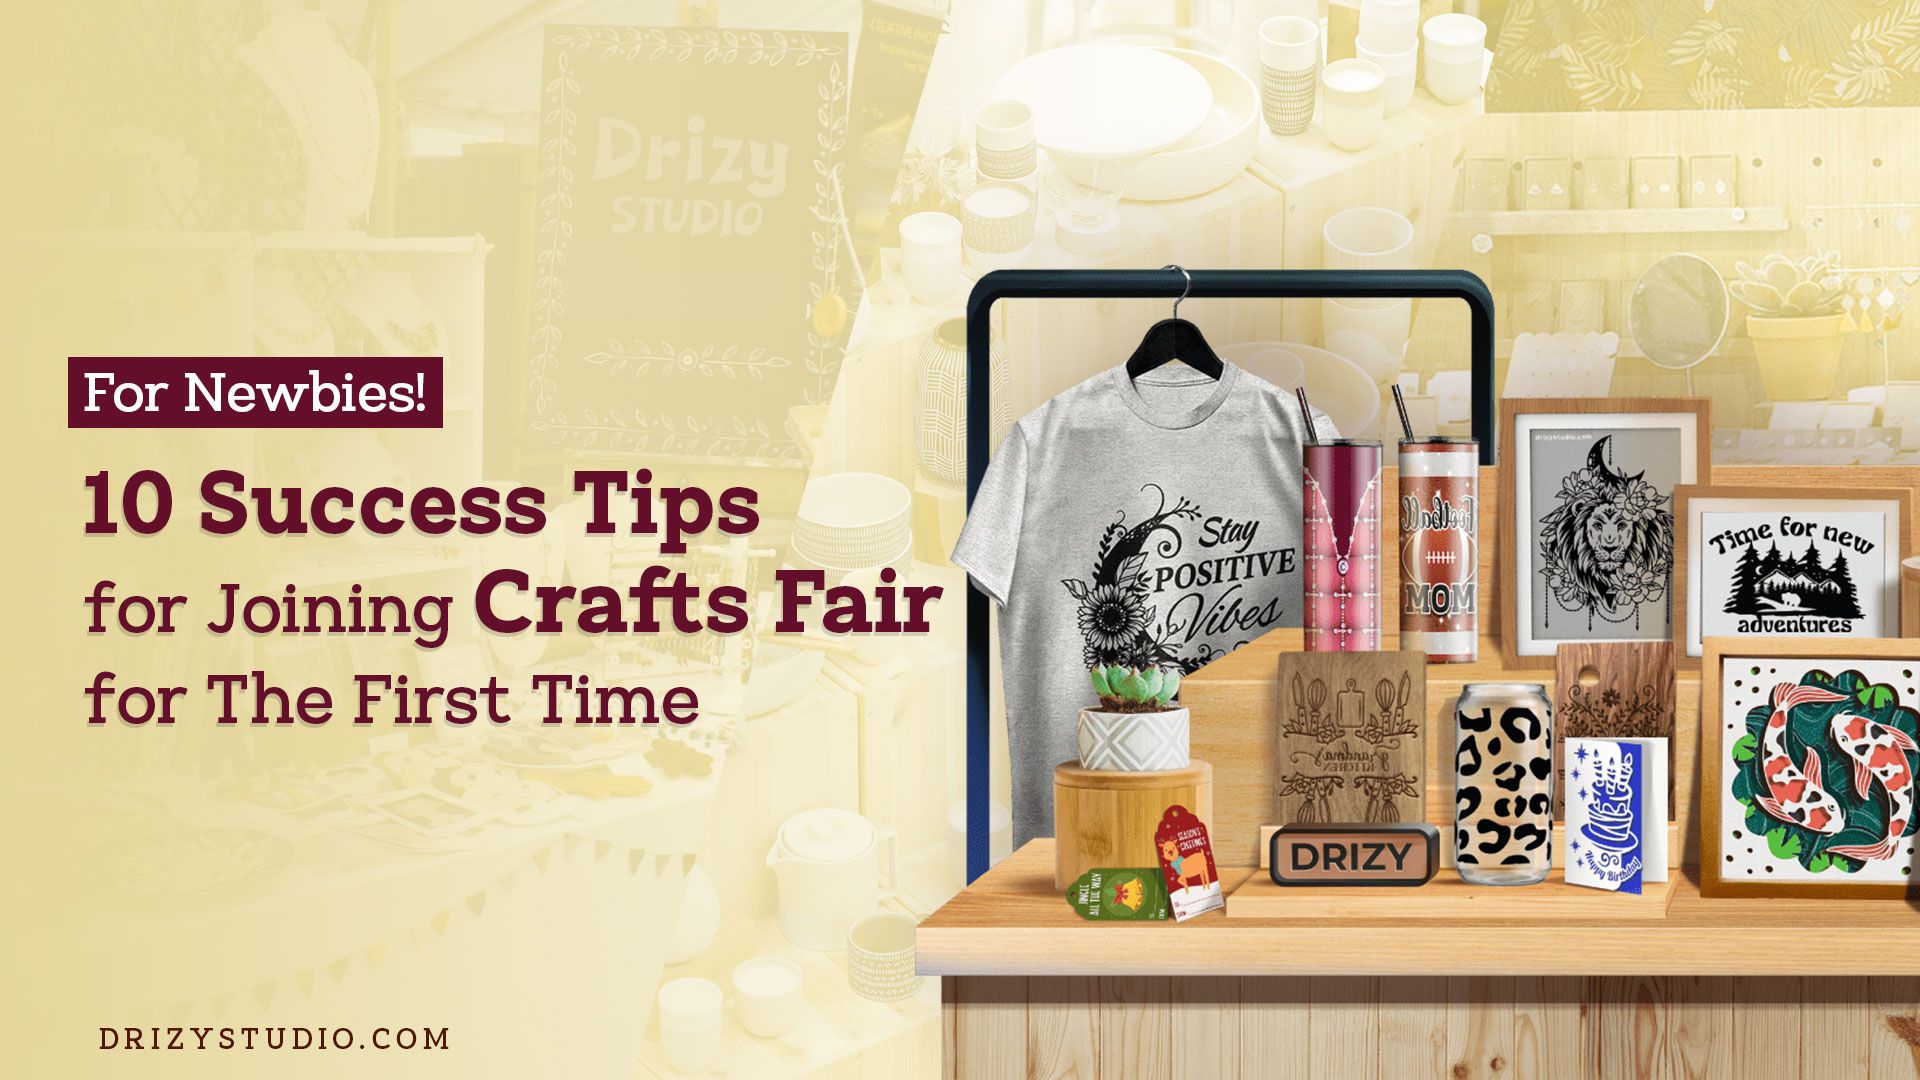 For Newbies 10 Success Tips for Joining Crafts Fair for The First Time cover